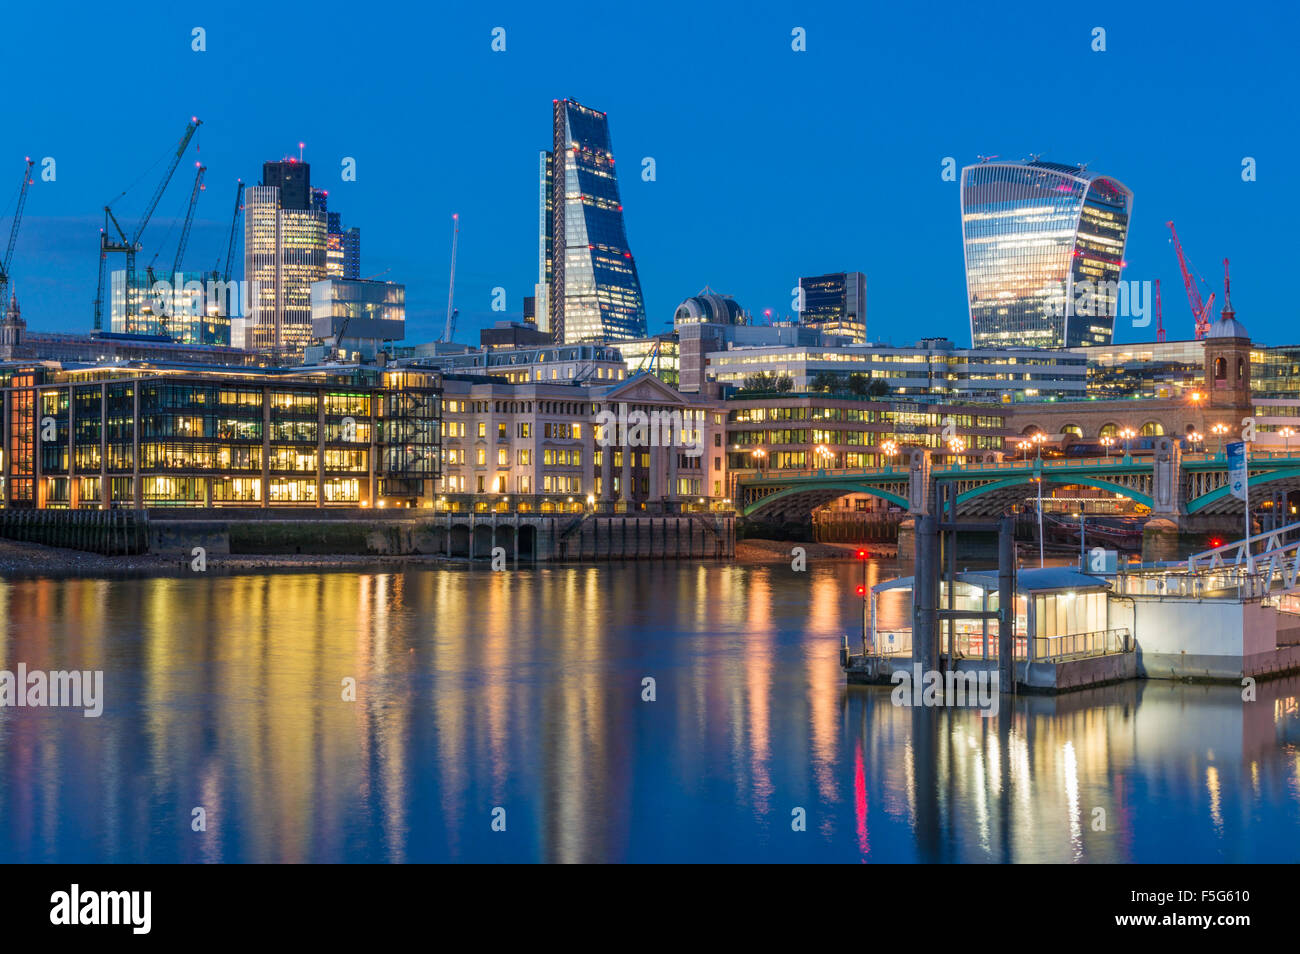 City of London skyline financial district skycrapers at sunset River Thames City of London UK GB EU Europe Stock Photo